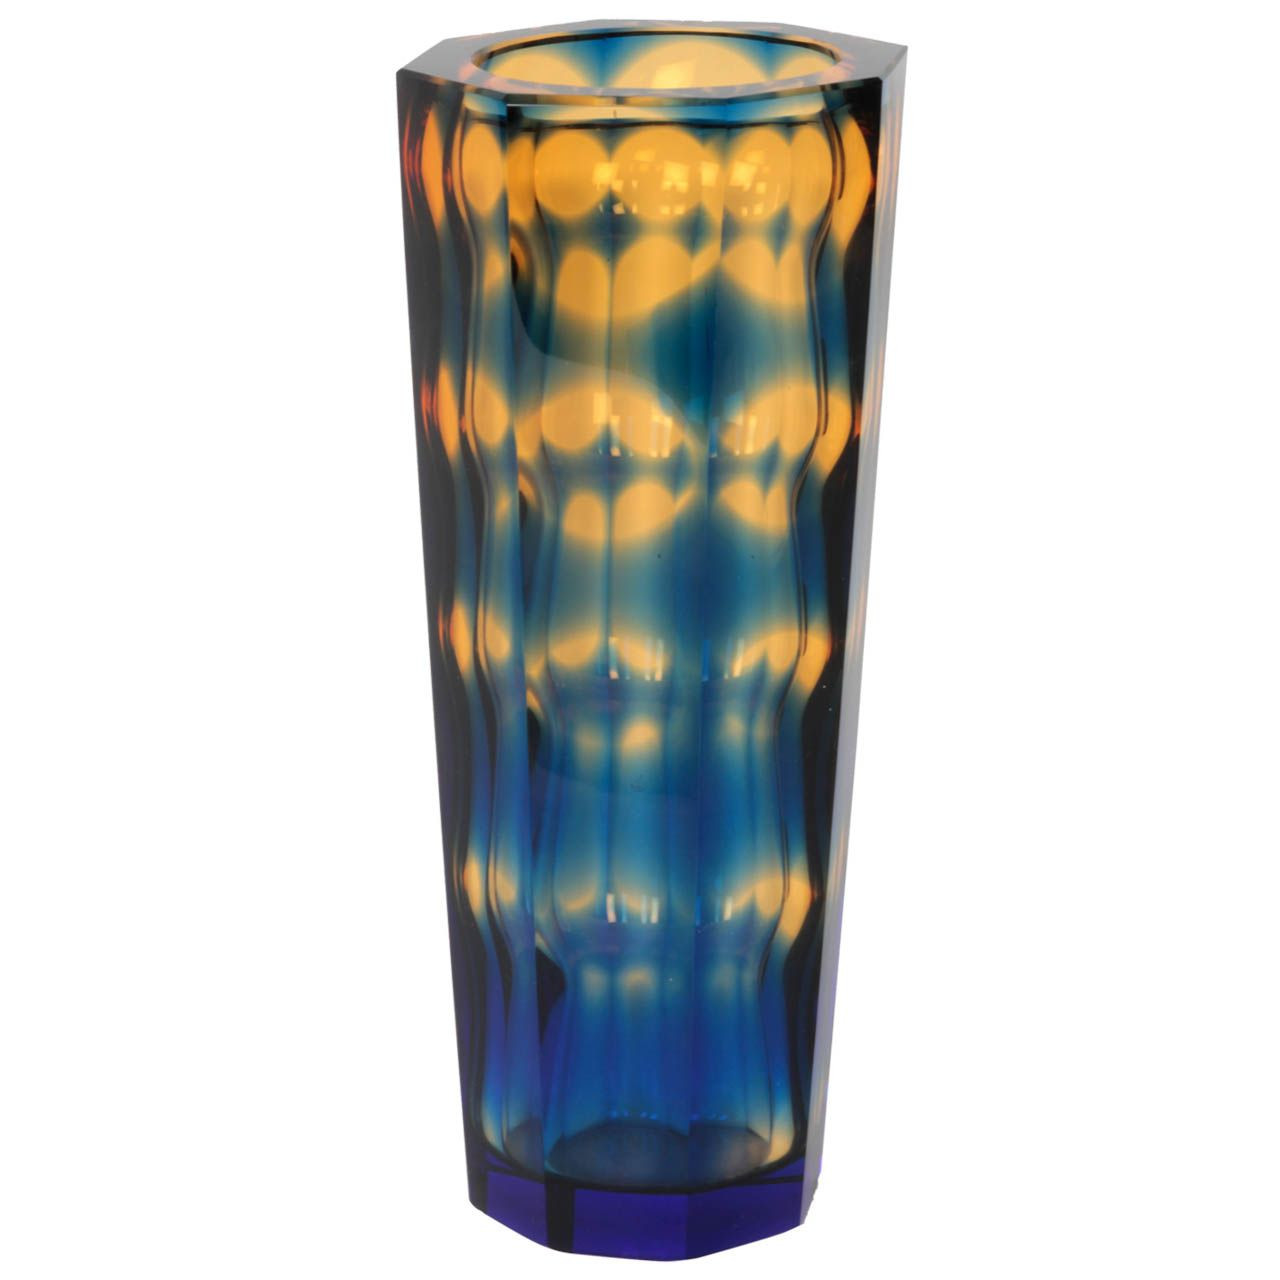 12 Fabulous 20 Glass Cylinder Vases 2024 free download 20 glass cylinder vases of an amazing sommerso glass vase in amber blue tones attributed to with an amazing sommerso glass vase in amber blue tones attributed to oldrich lipsky